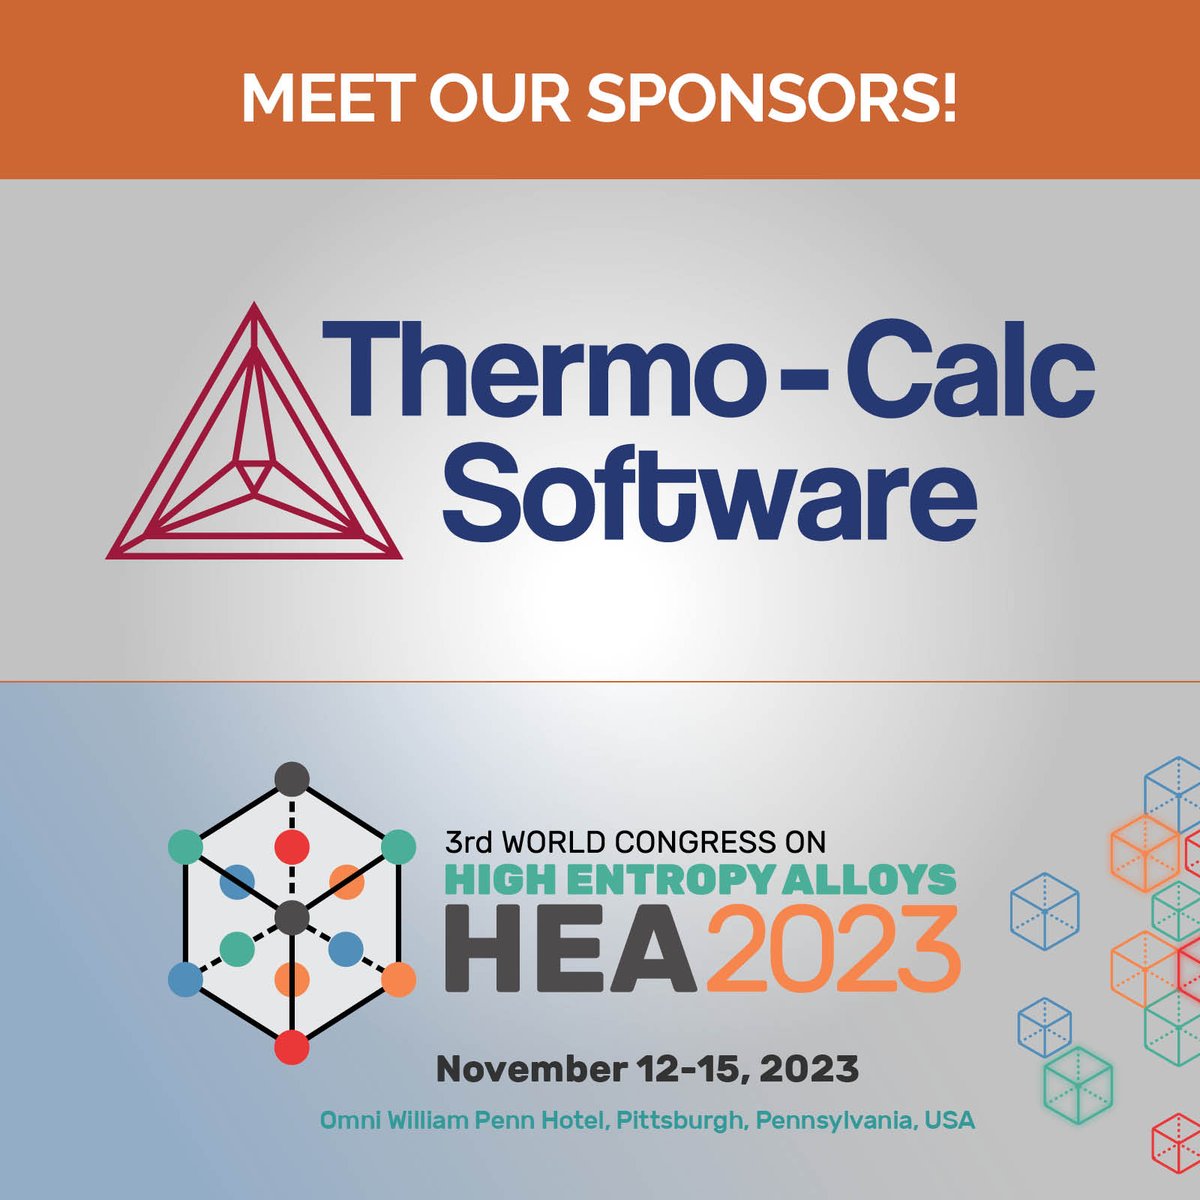 TMS is delighted to announce that ThermoCalc is joining us at HEA 2023 as an exhibitor! Read more about the event at tms.org/HEA2023